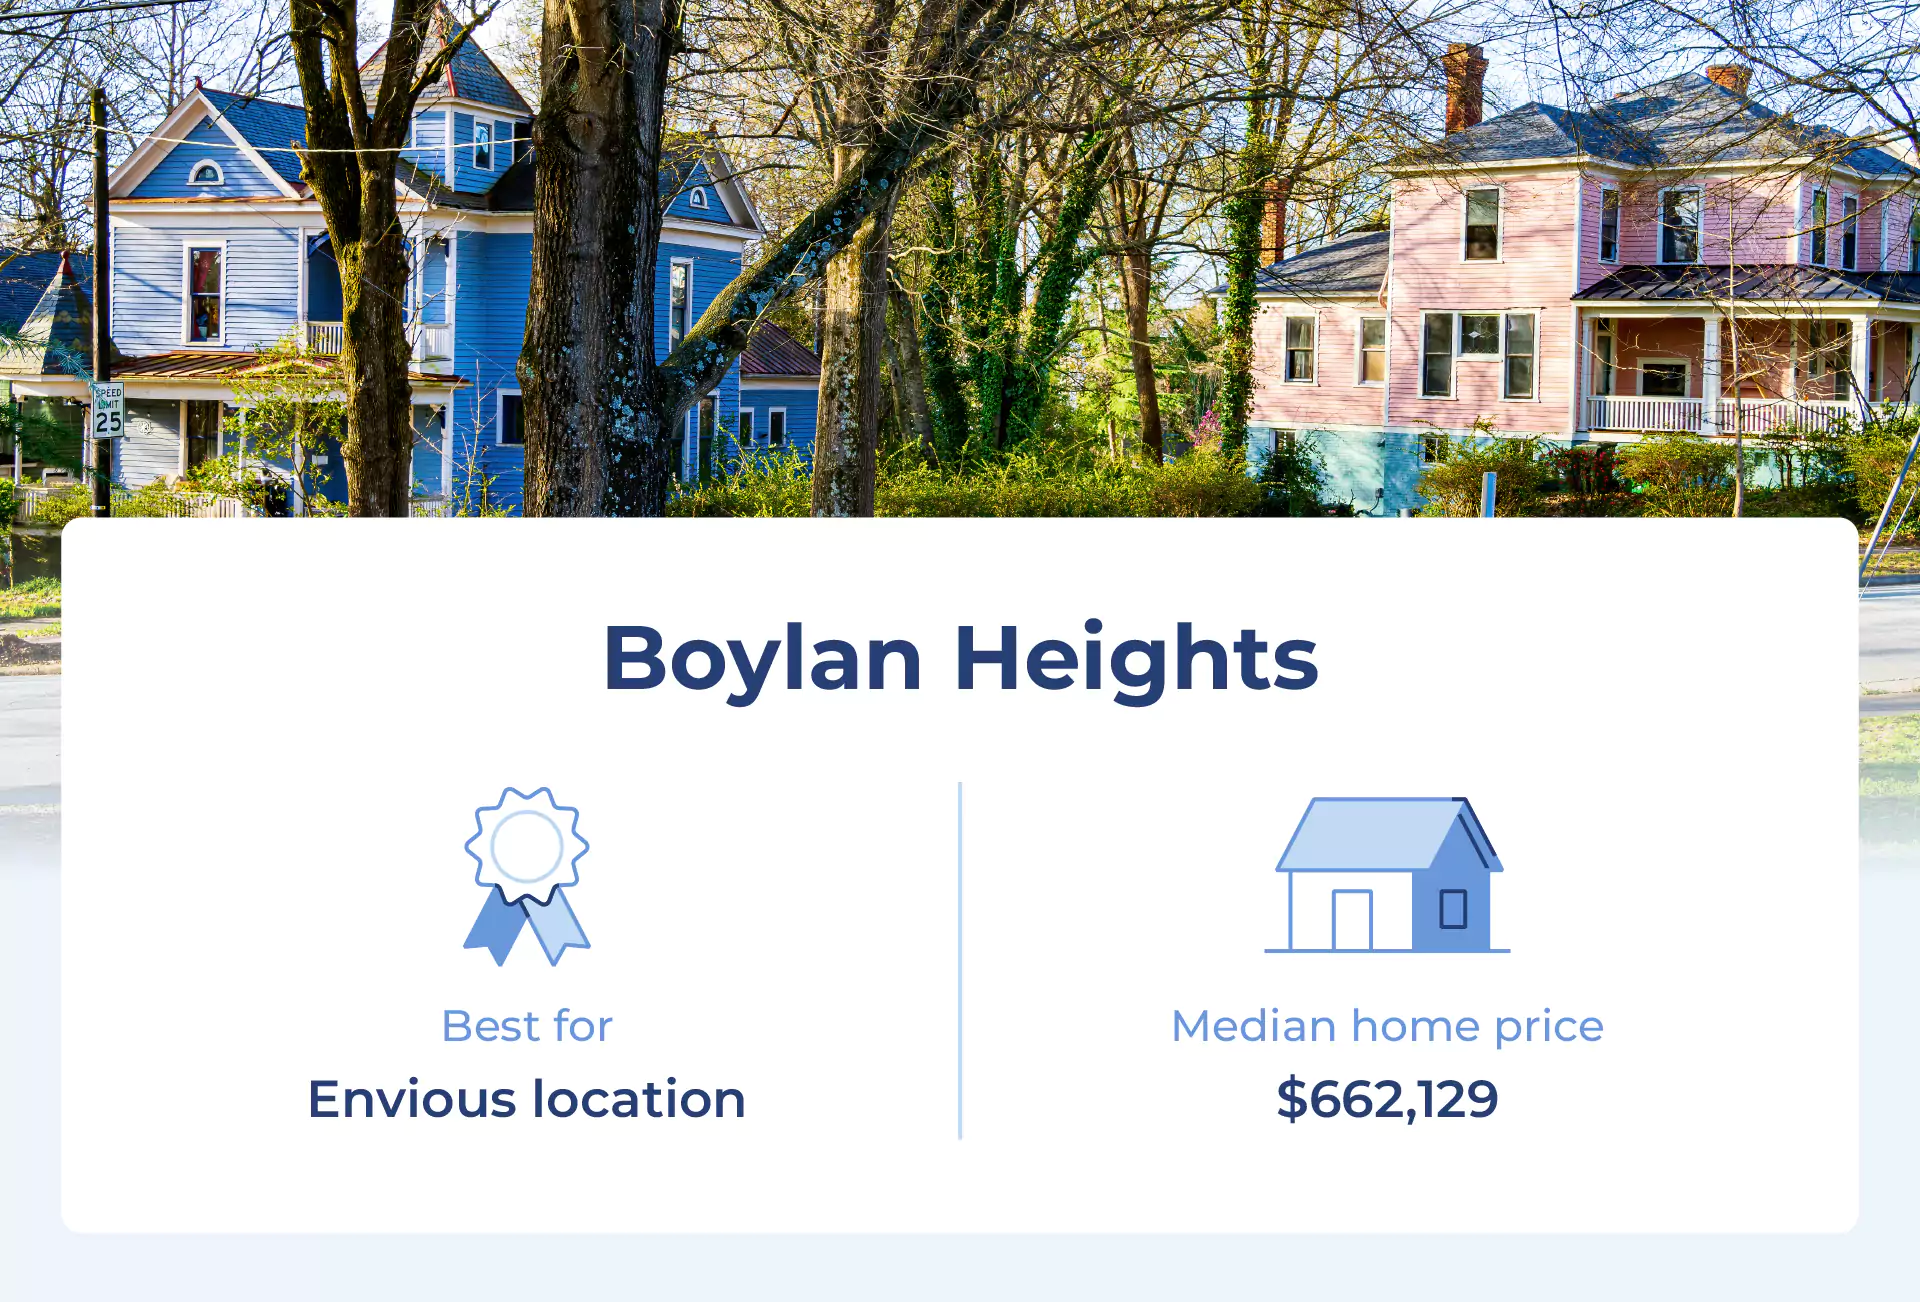 Image shows the median price for one of the best neighborhoods in Raleigh, Boylan Heights.